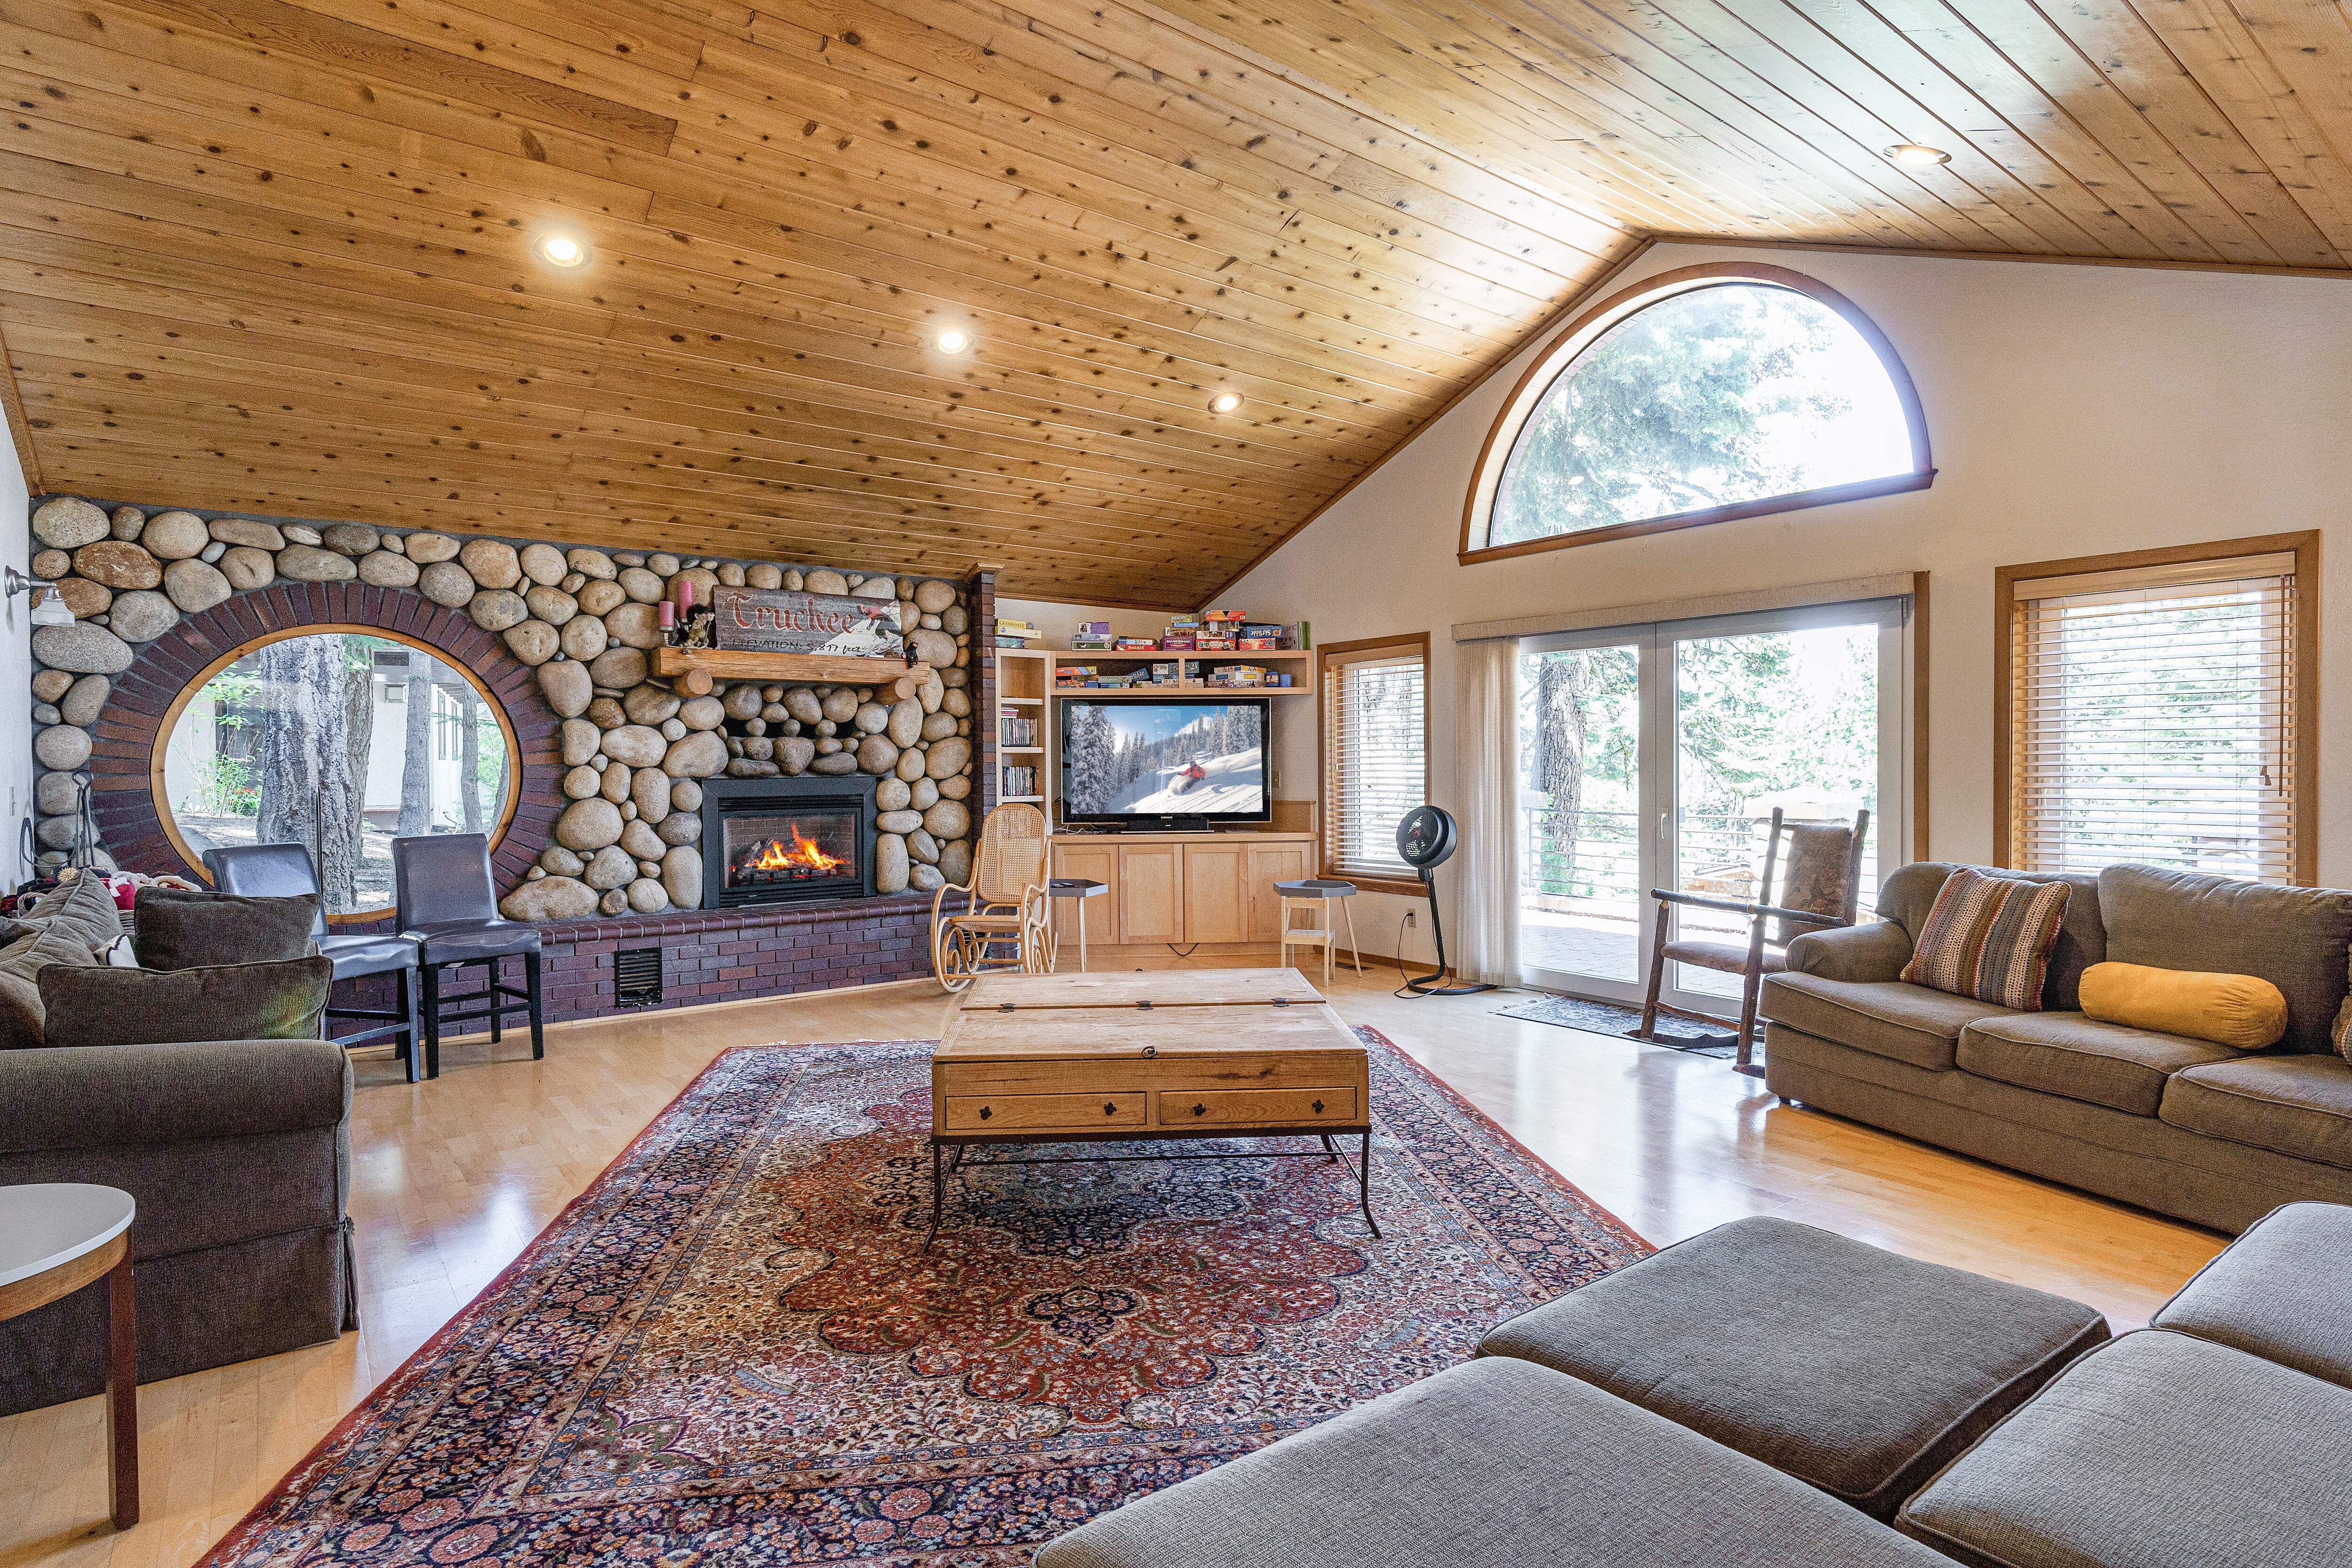 Welcome to Truckee! This deluxe estate is professionally managed by TurnKey Vacation Rentals.